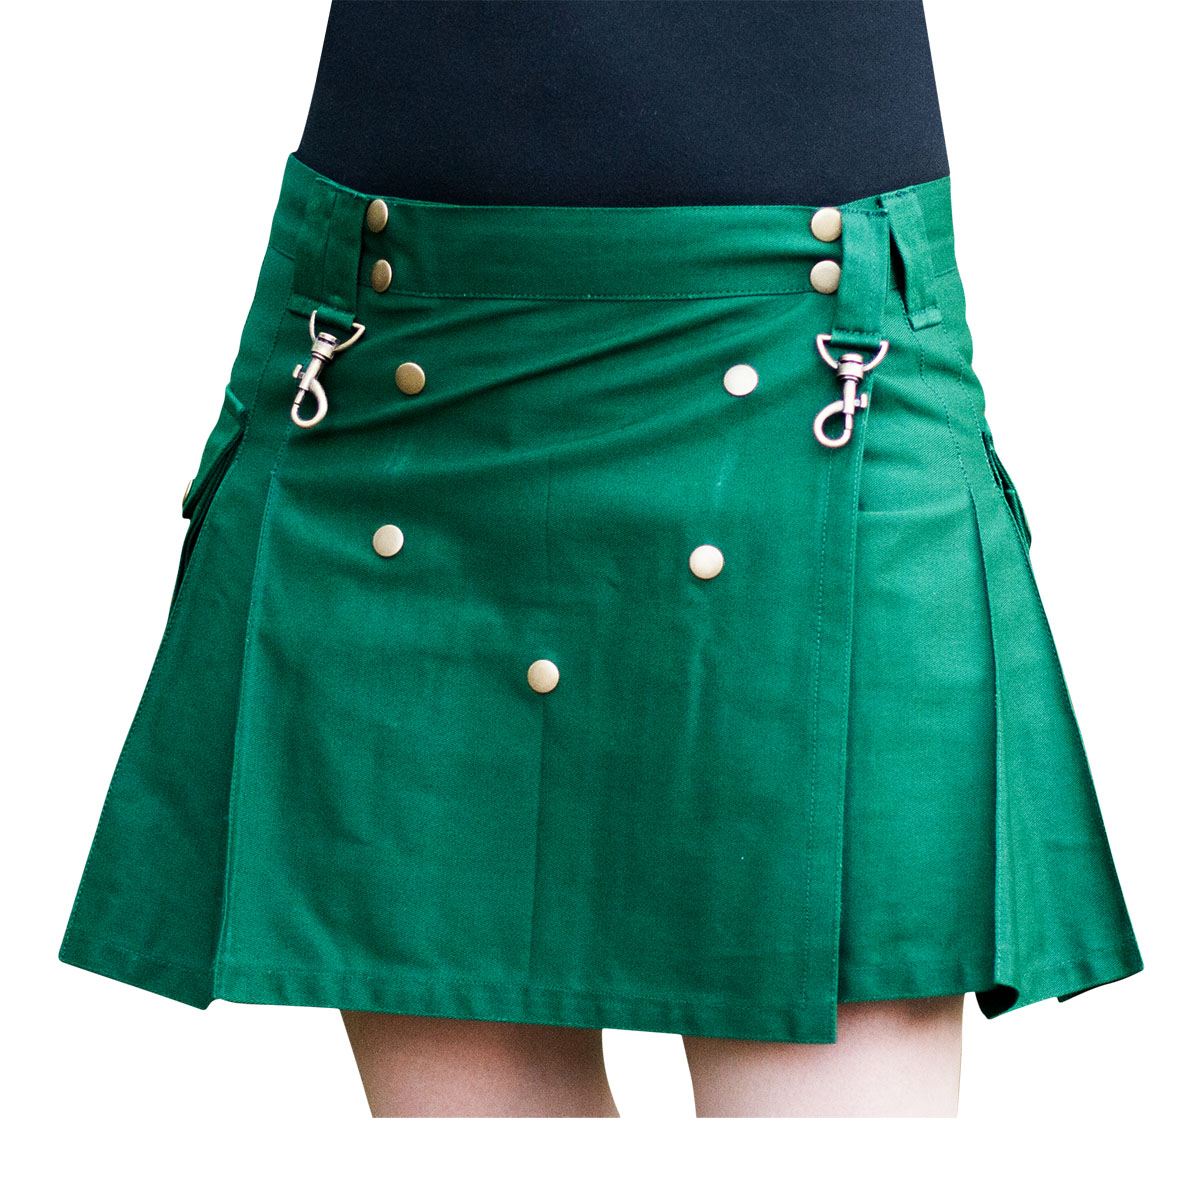 A woman donning a Ladies Wilderness Mini Kilt with gold buttons.